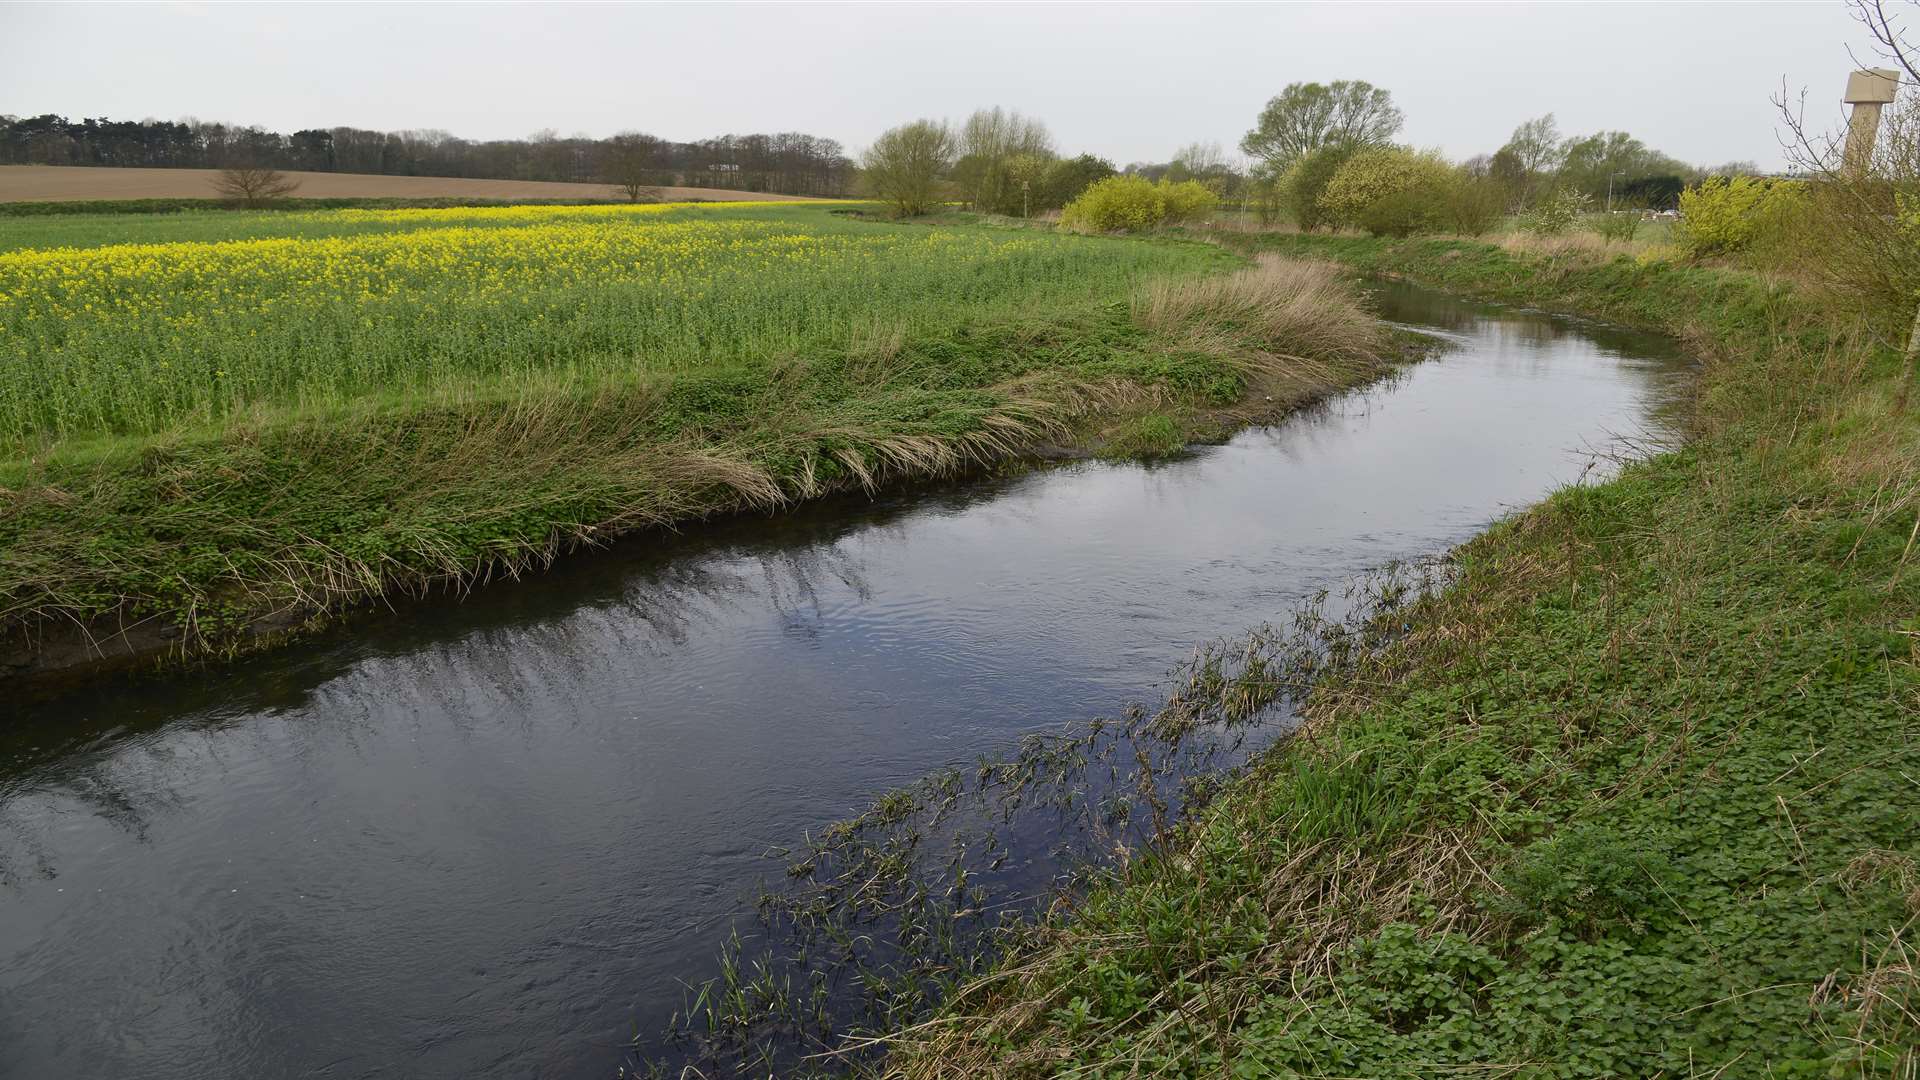 The Environment Agency warns parts of the River Stour are at flood risk